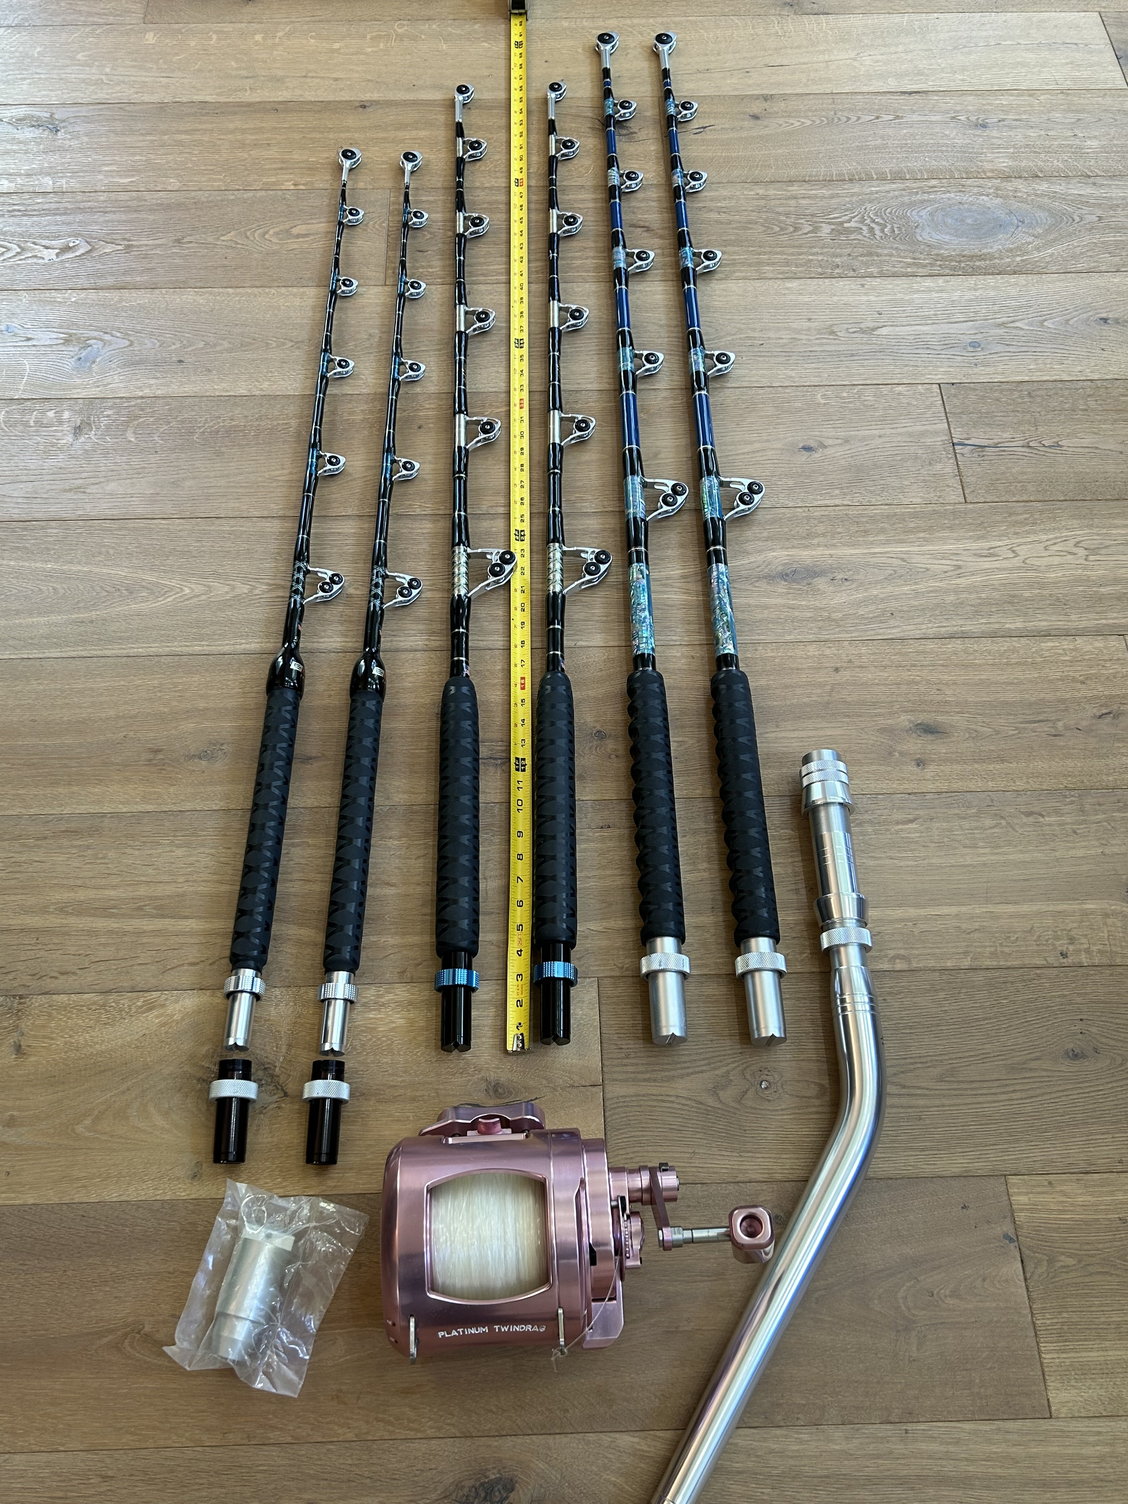 Rods-Connley. Reel Easy, Winthrop, Accurate ATD 130, Top of the line Custom  Wow - The Hull Truth - Boating and Fishing Forum